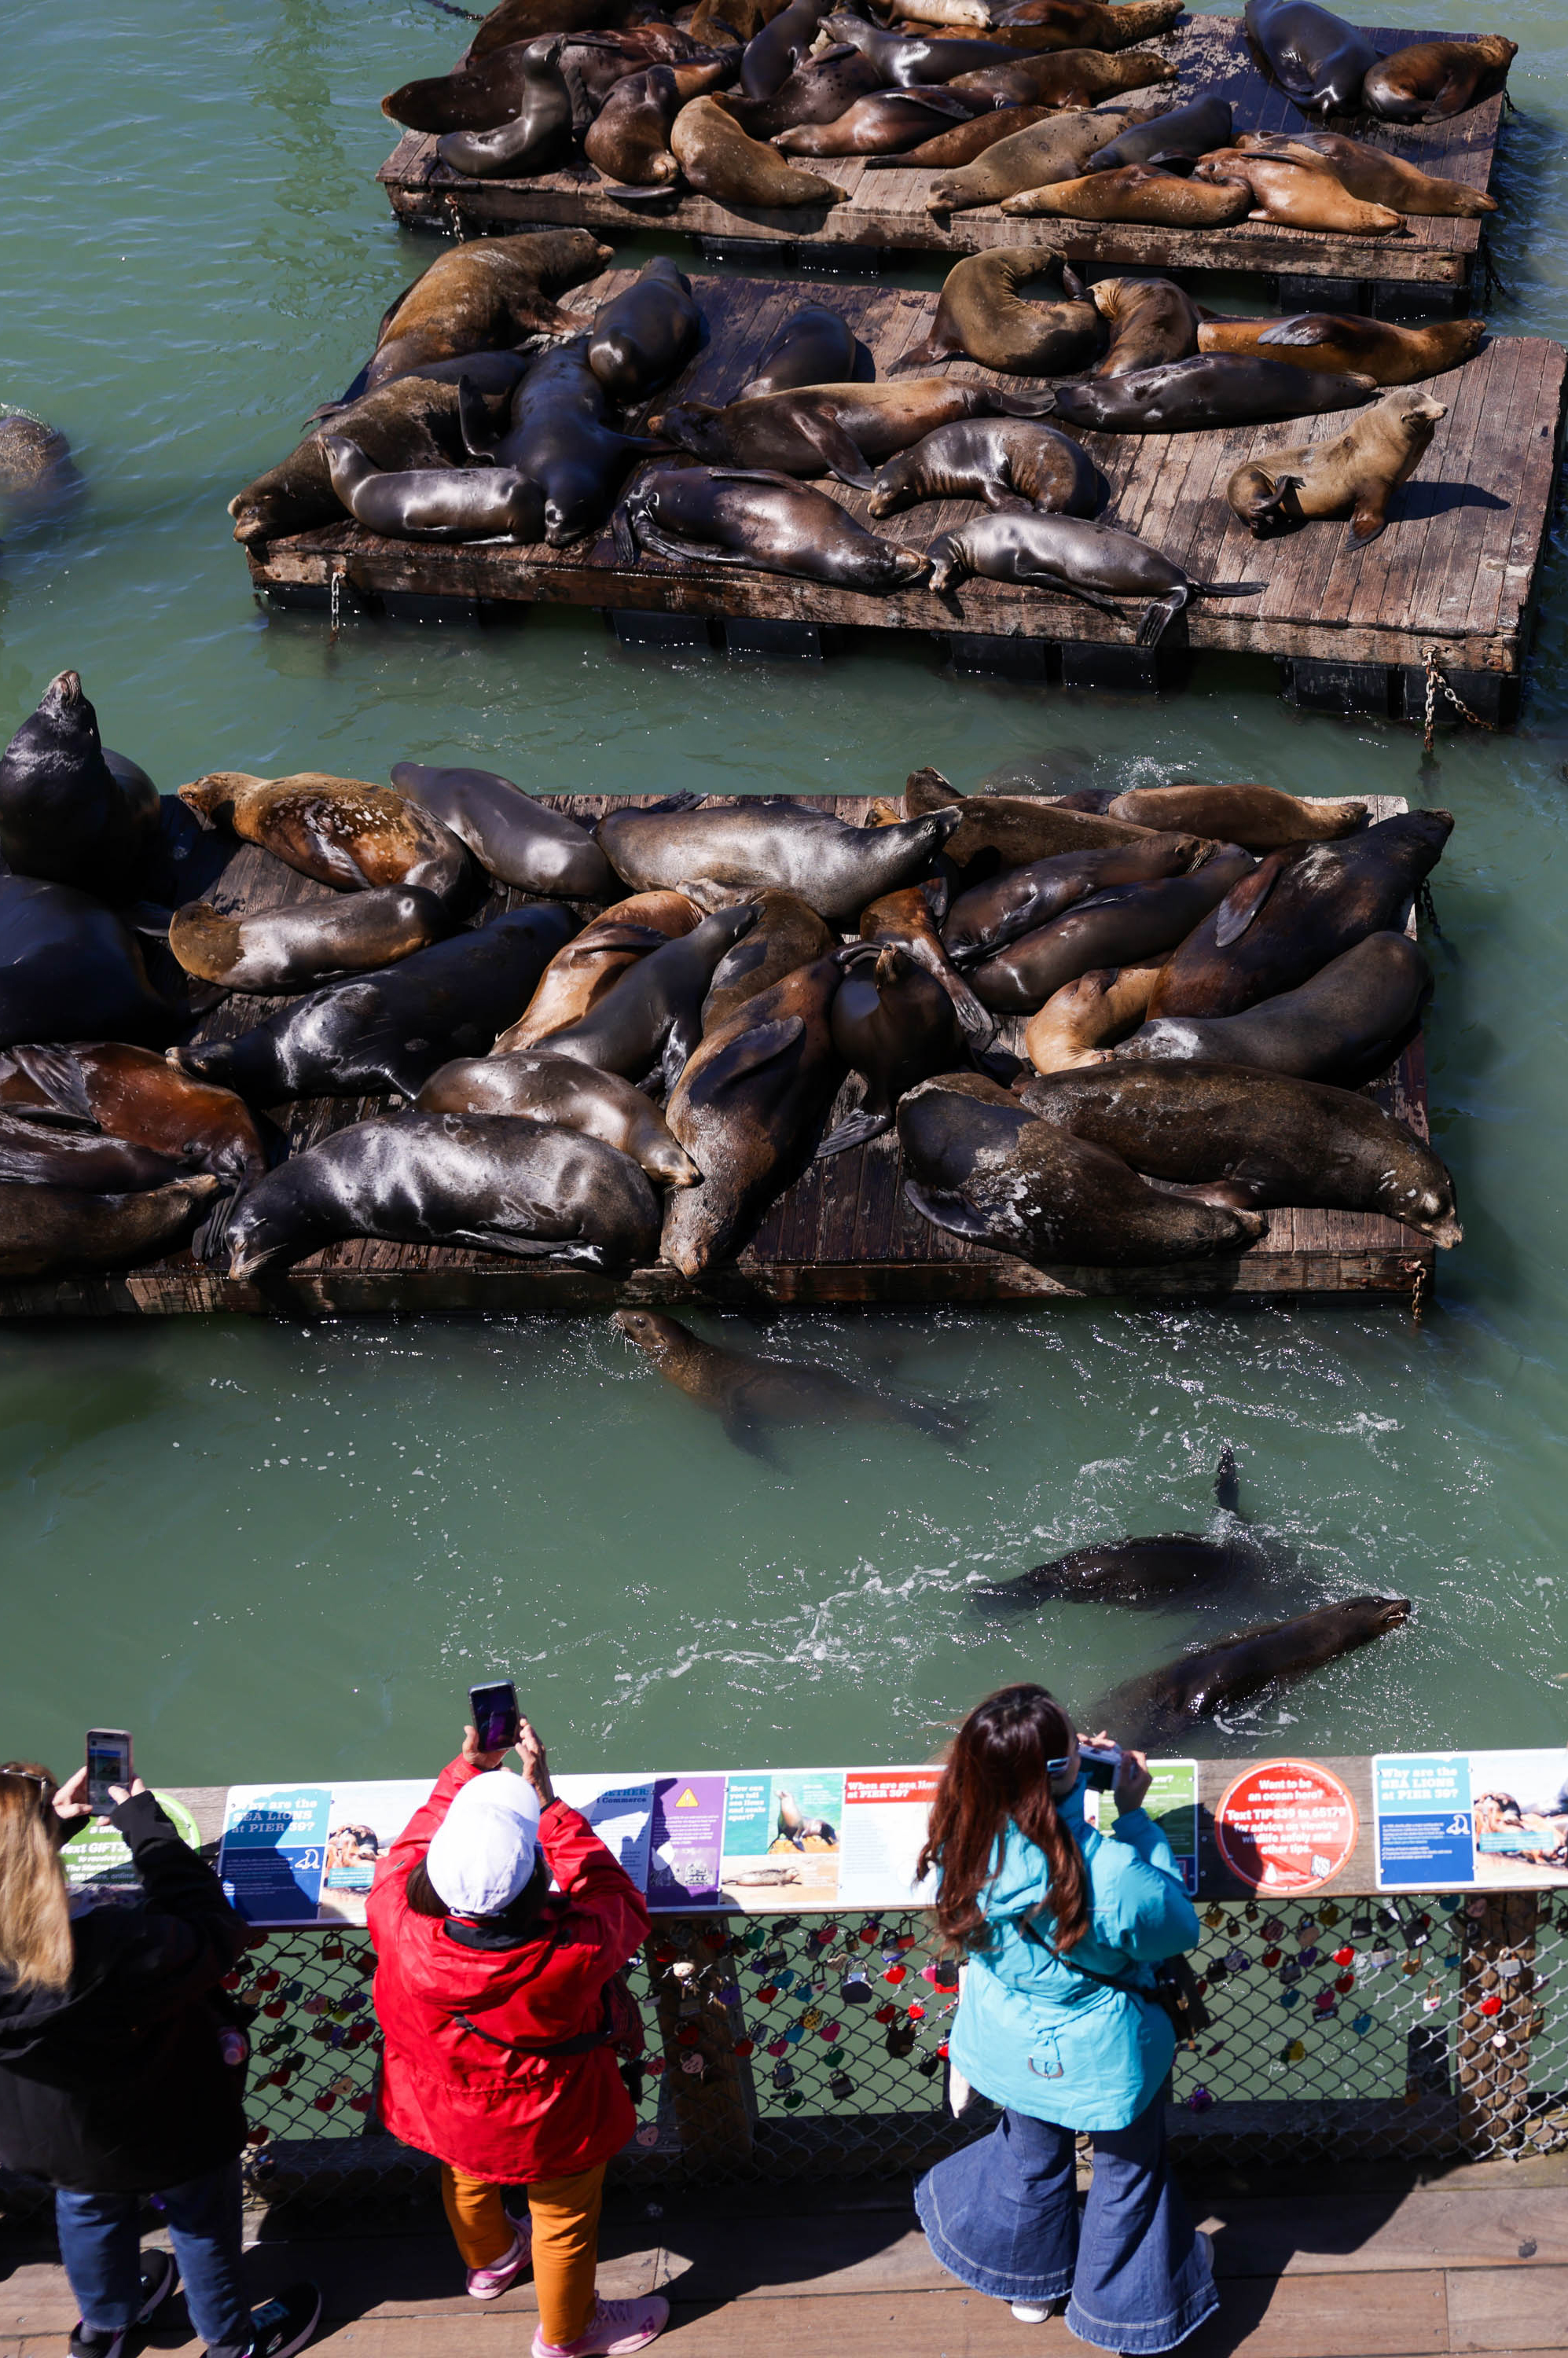 People are observing sea lions basking on floating docks; one sea lion is in the water.